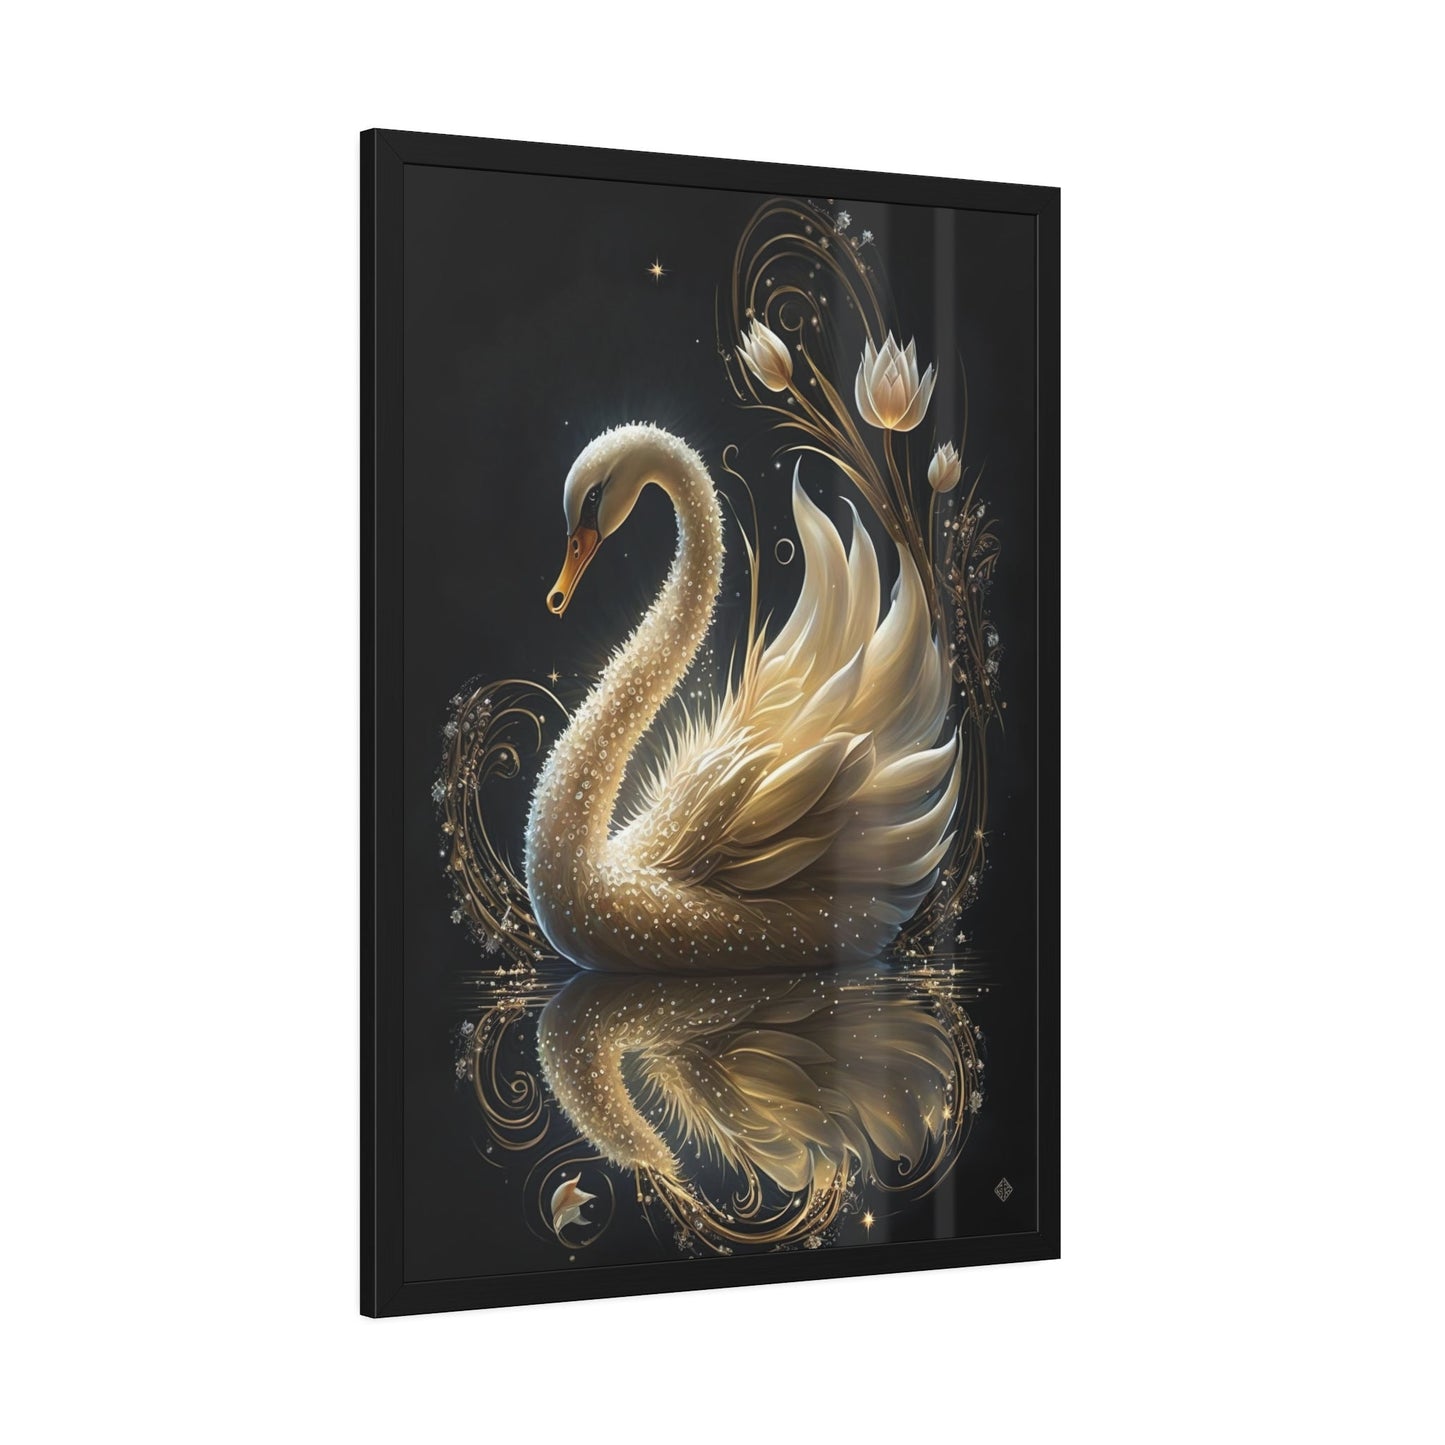 The Majesty of Nature: Wall Art Celebrating the Beauty of Swan and Their Natural Environment